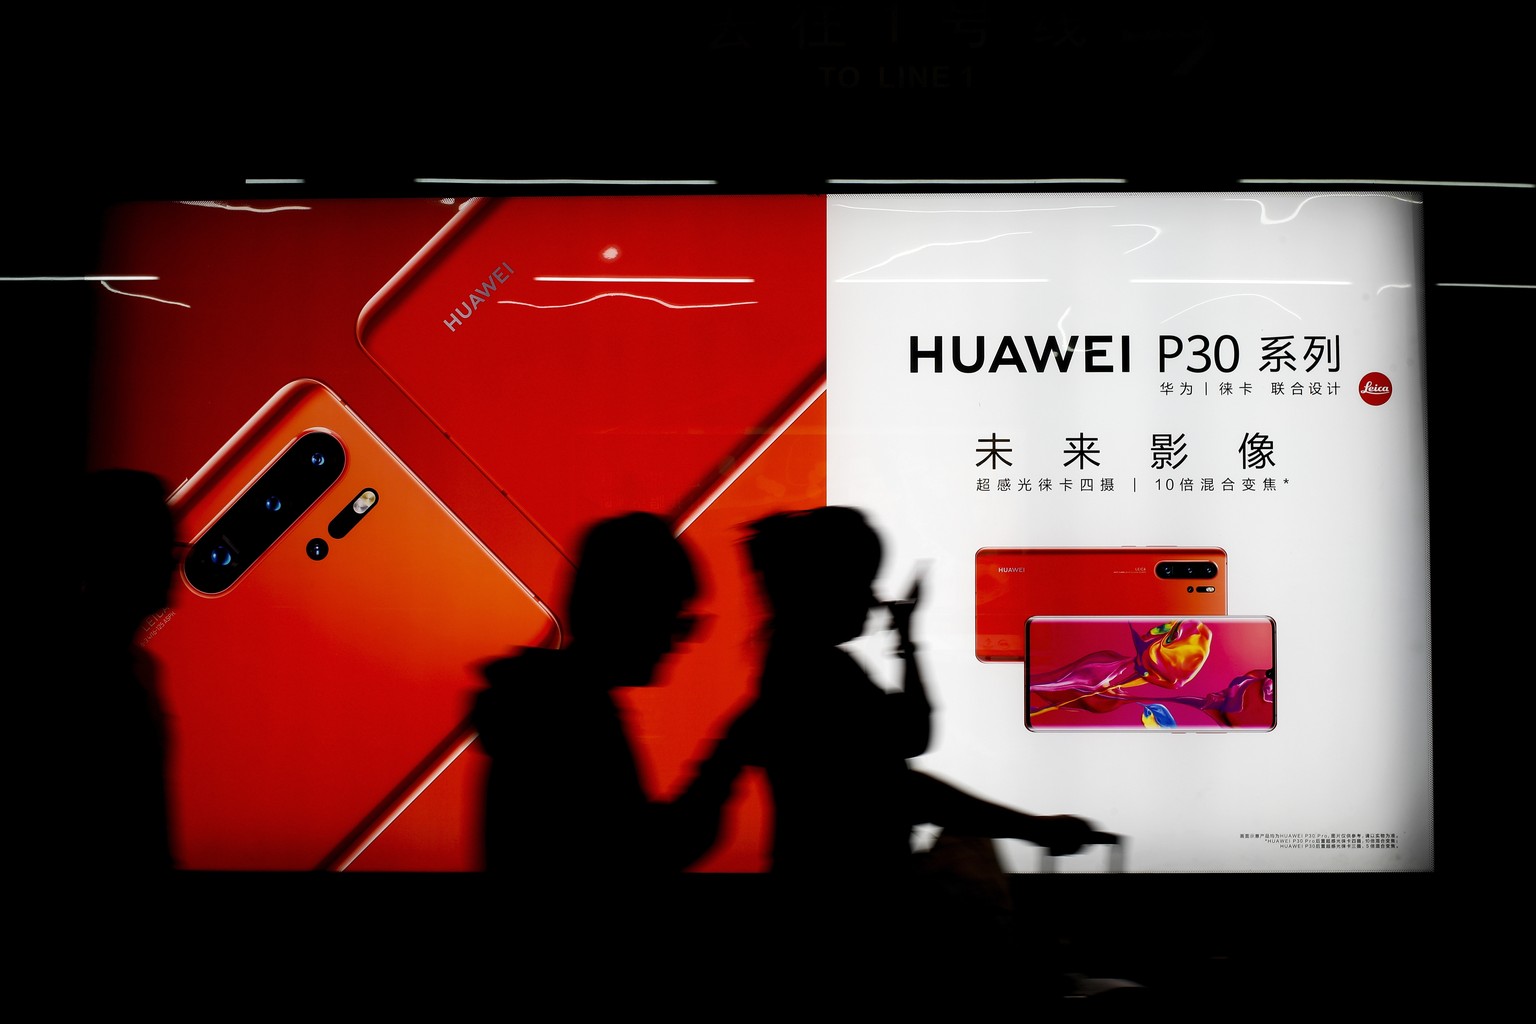 Commuters walk by the new Huawei P30 smartphone advertisement on display inside a subway station in Beijing Monday, May 13, 2019. China's intensified tariff war with the Trump administration is threat ...